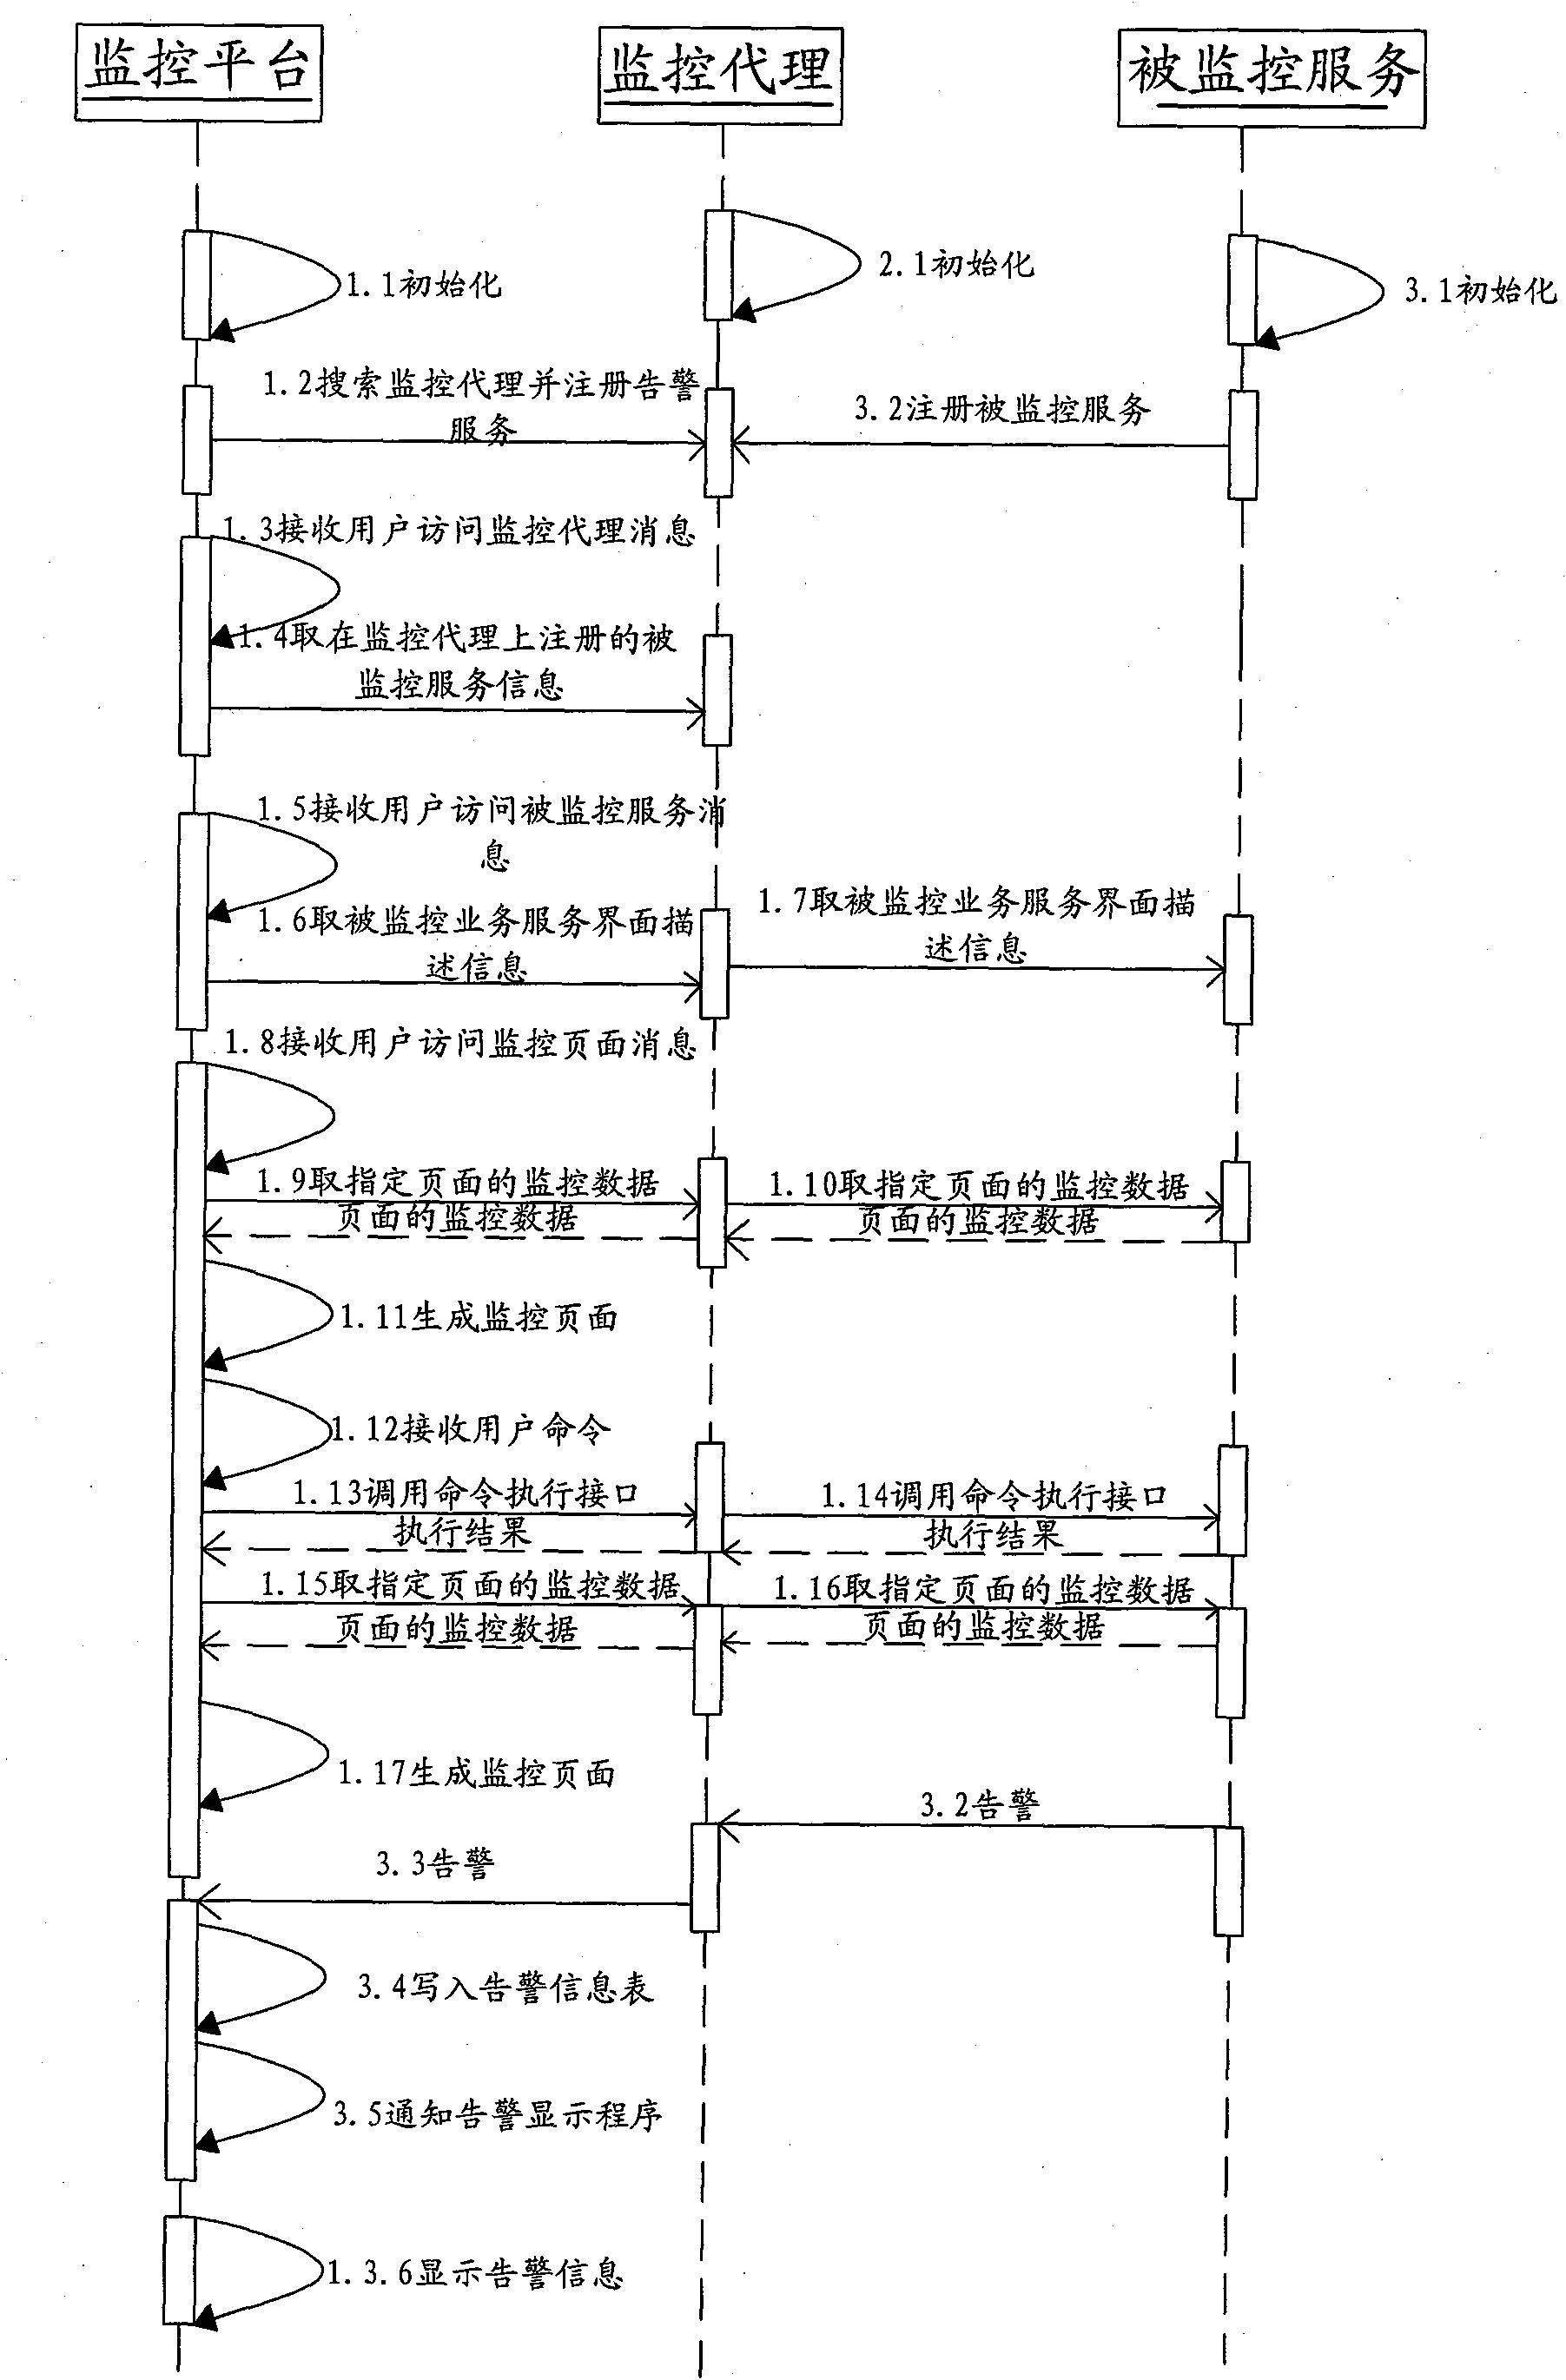 Method for monitoring communication service